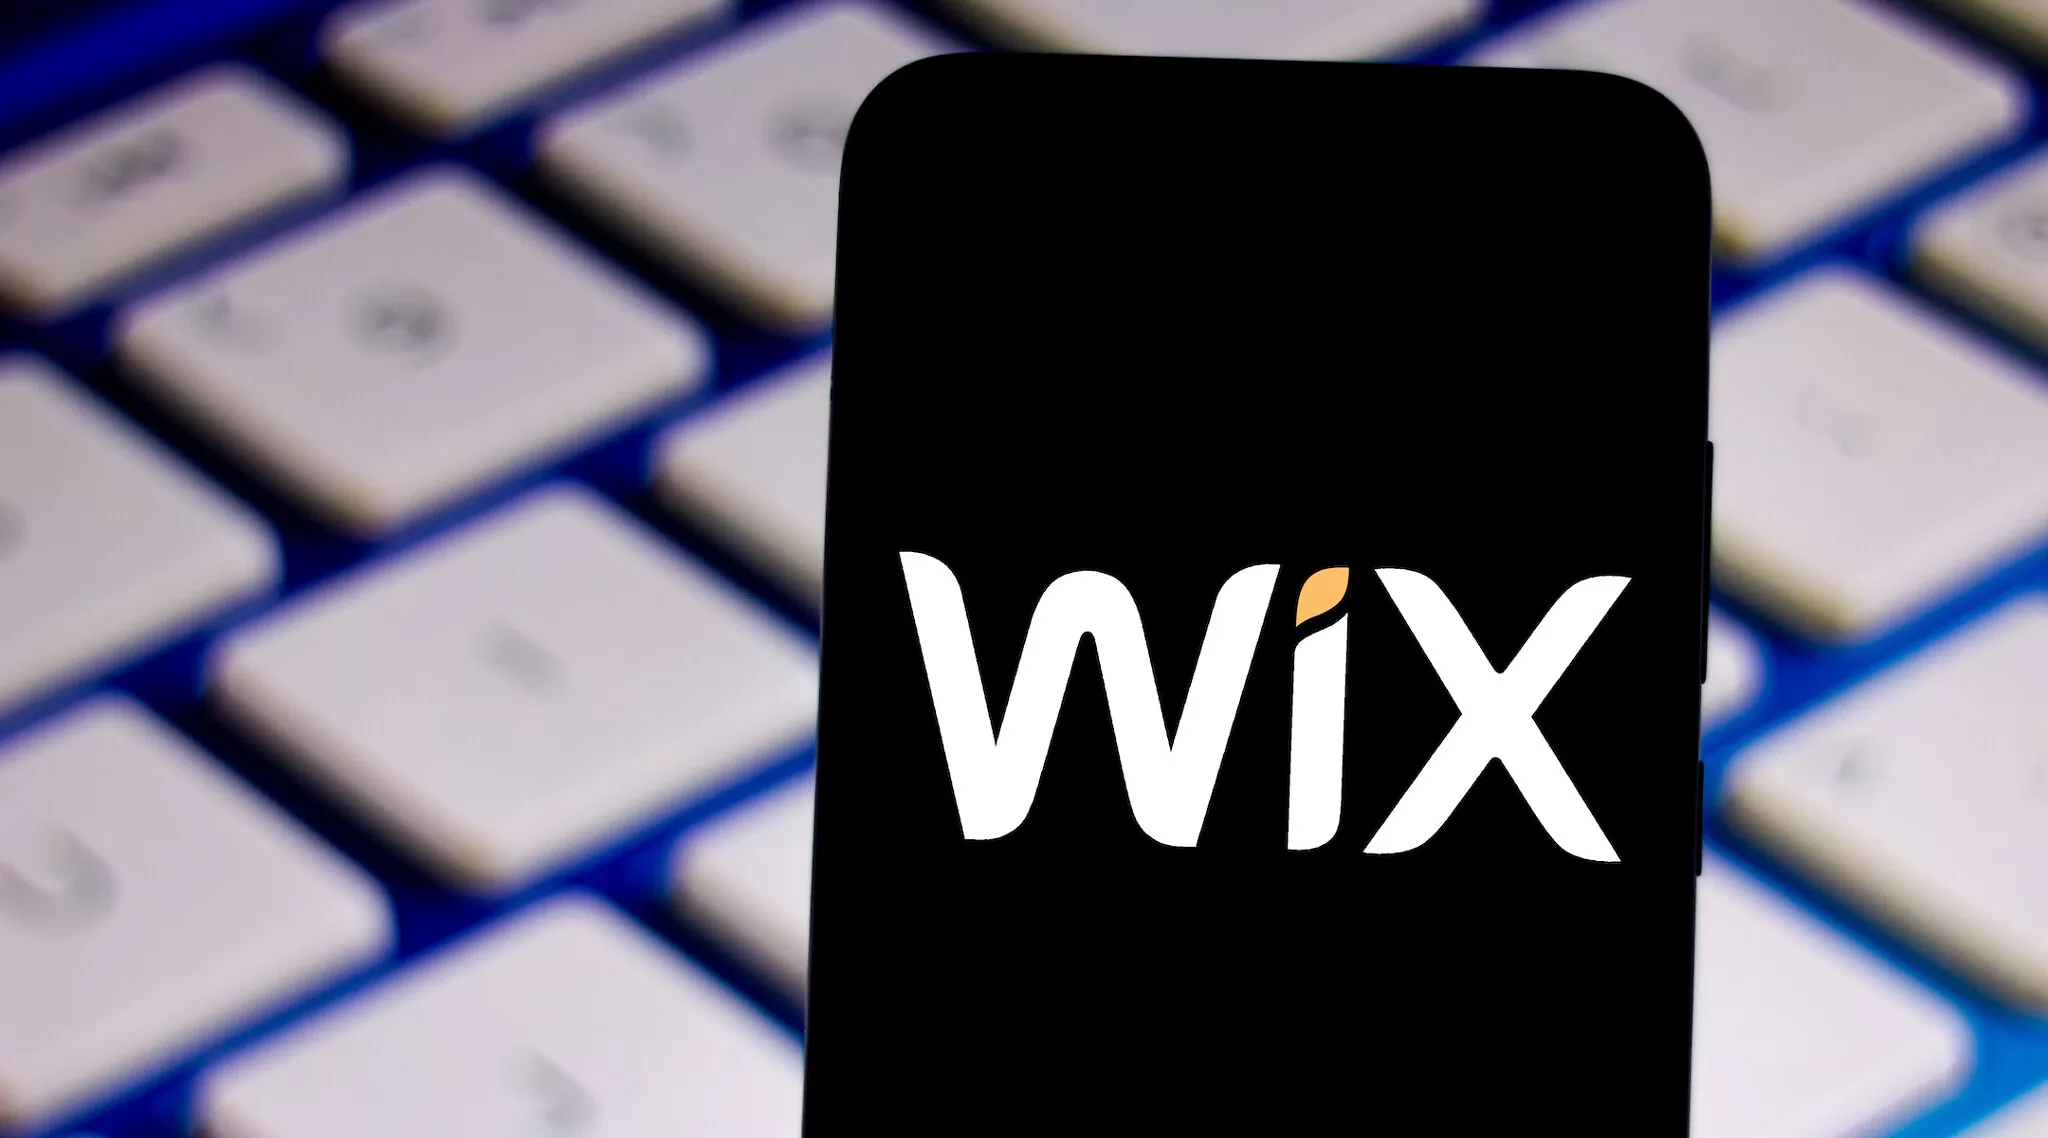 CoinGate partnership with Wix to Provide Crypto Payments Solutions